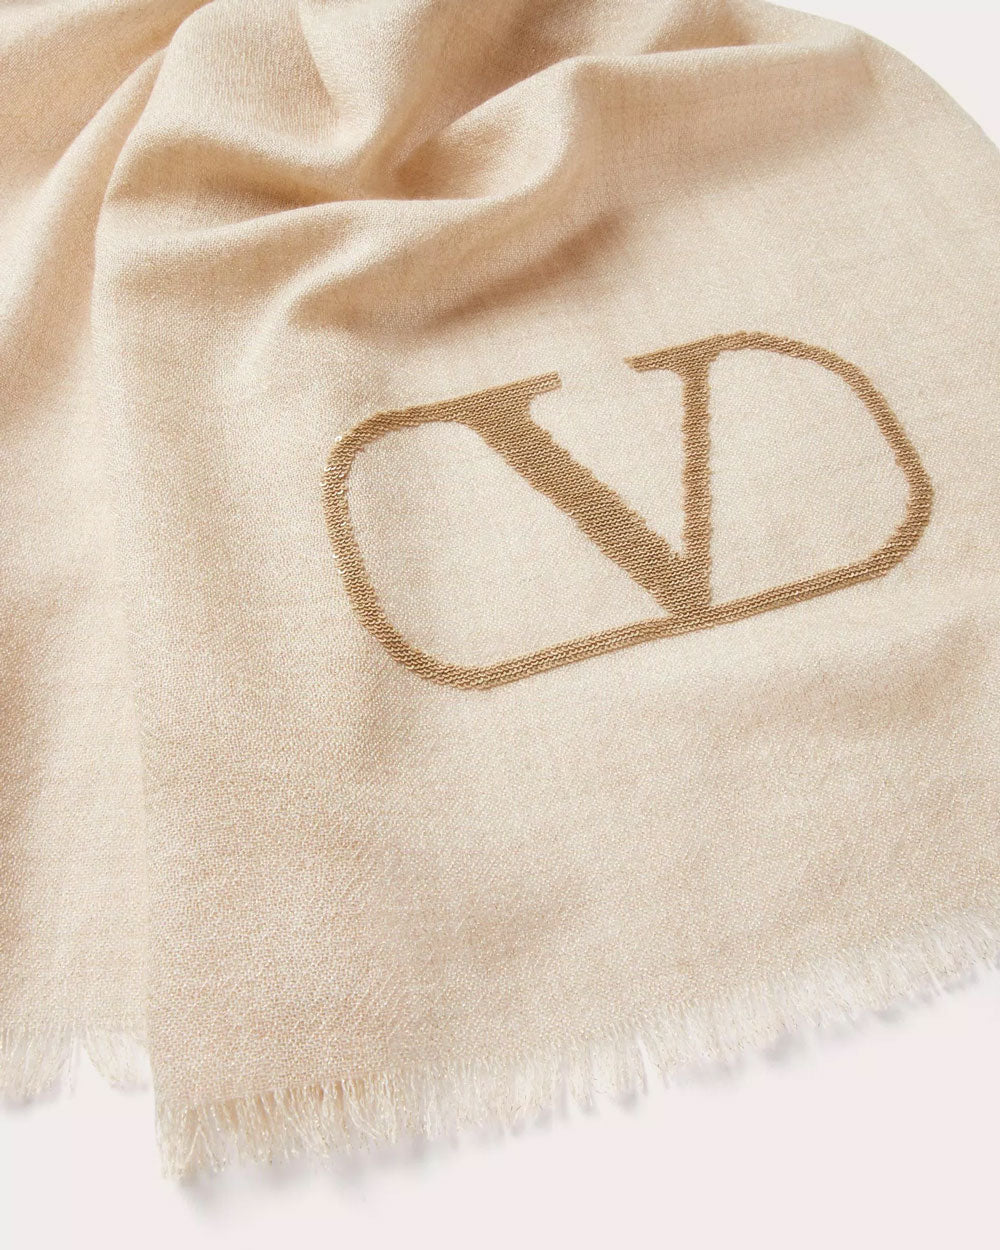 Vlogo Signature Cashmere and Silk Shawl in Camel